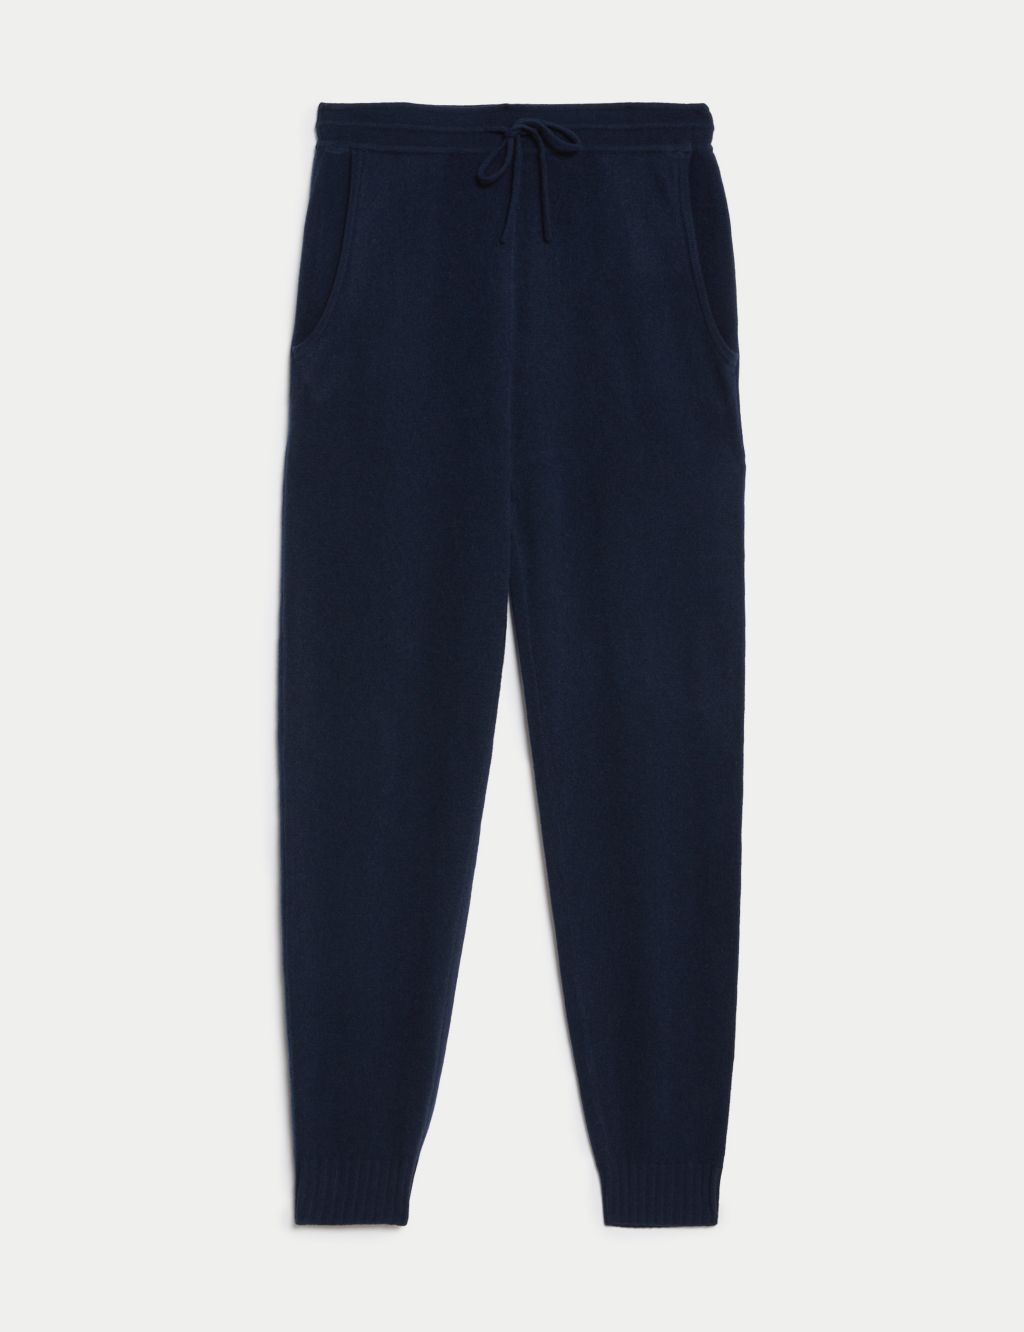 Pure Cashmere Tapered Ankle Grazer Joggers image 2